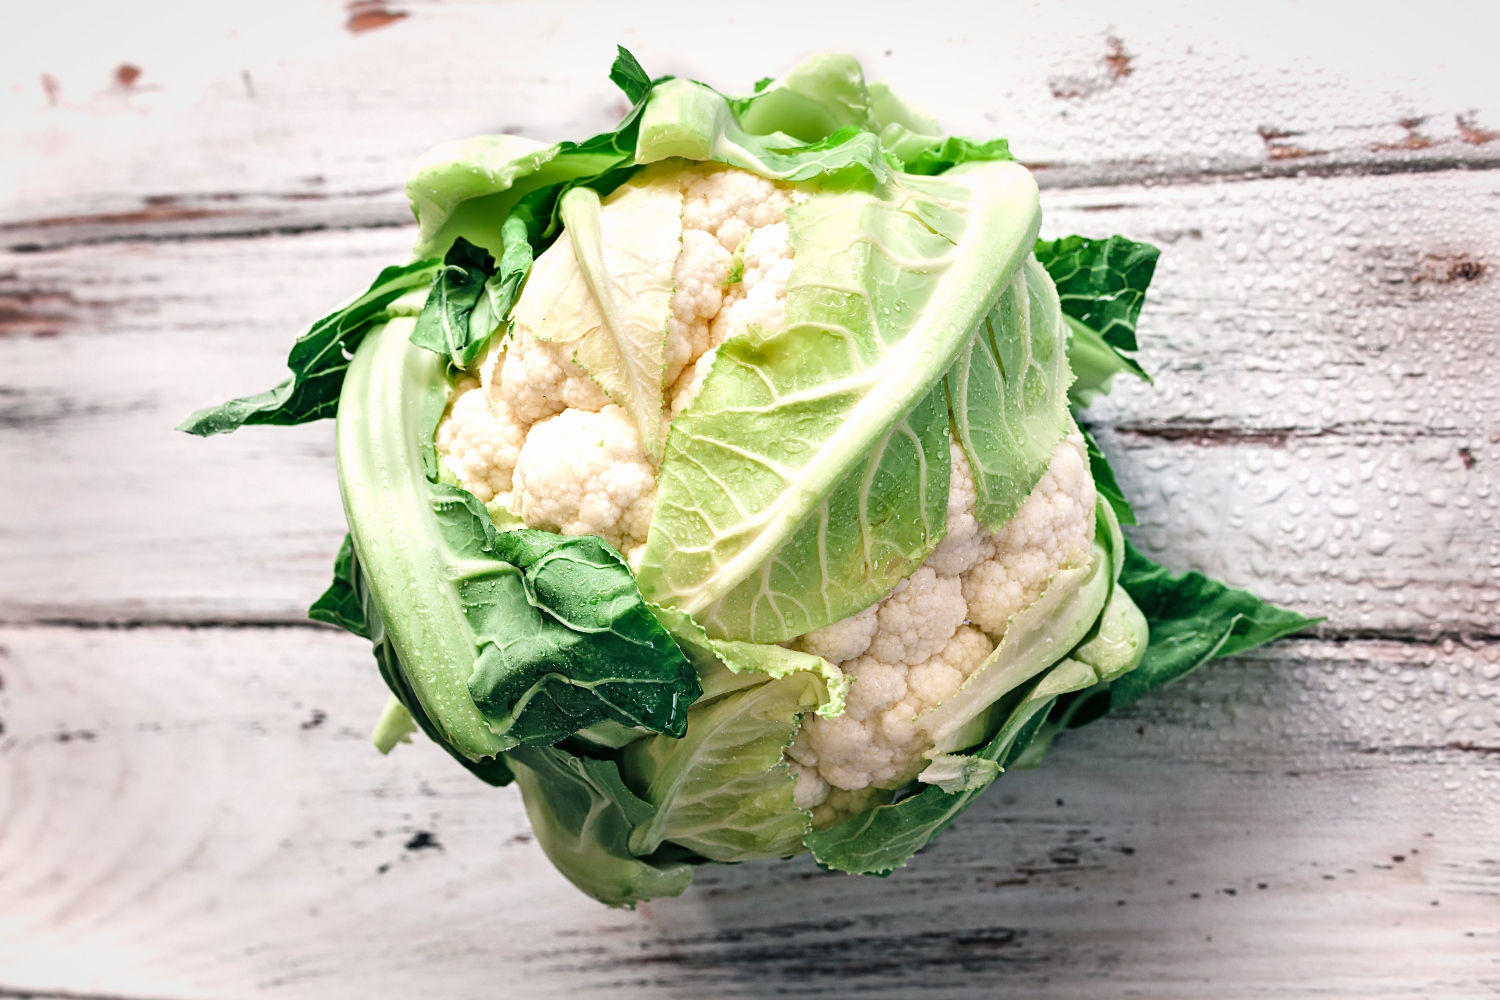 7 Cauliflower Growing Stages From Seed To Harvest